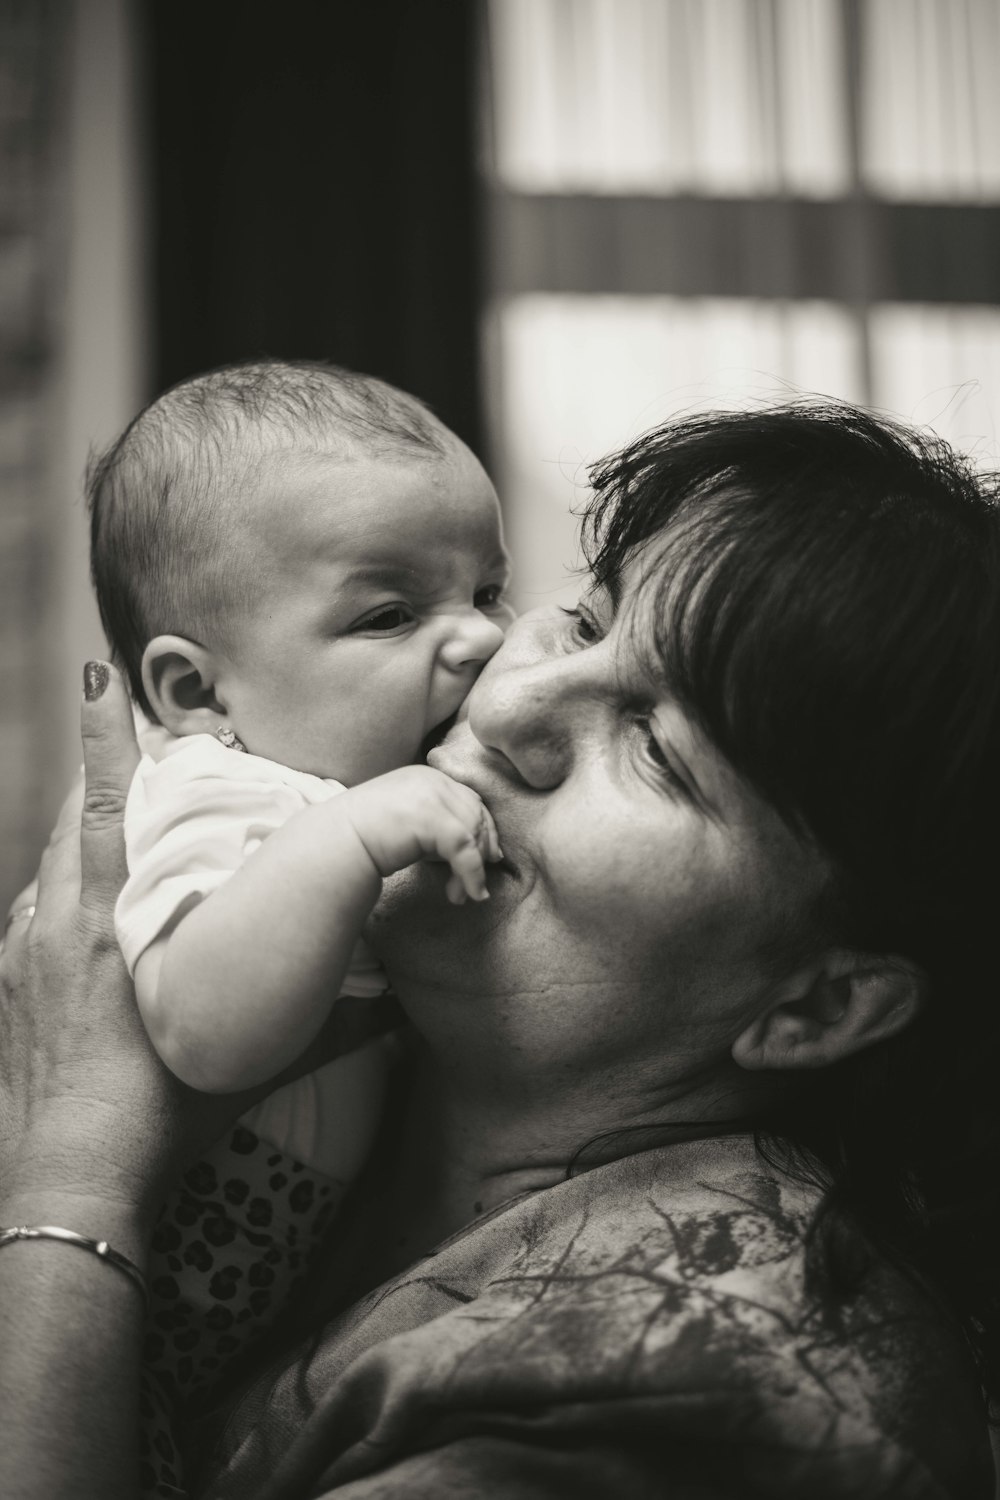 grayscale photo of woman kissing baby